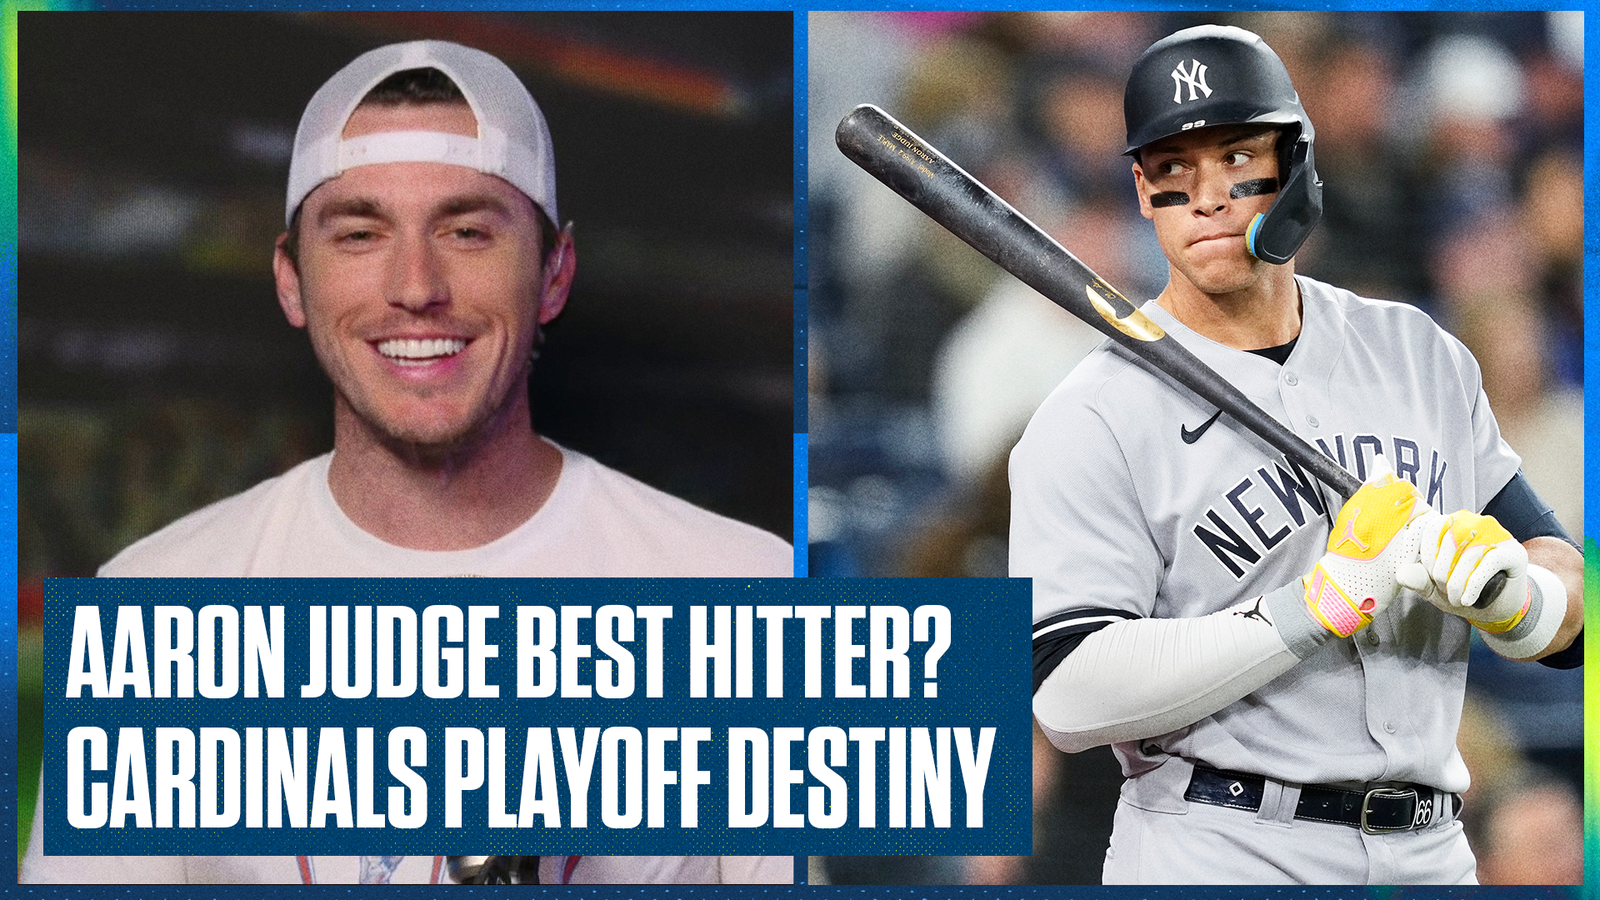 Aaron Judge is the most influential player in the Major Leagues